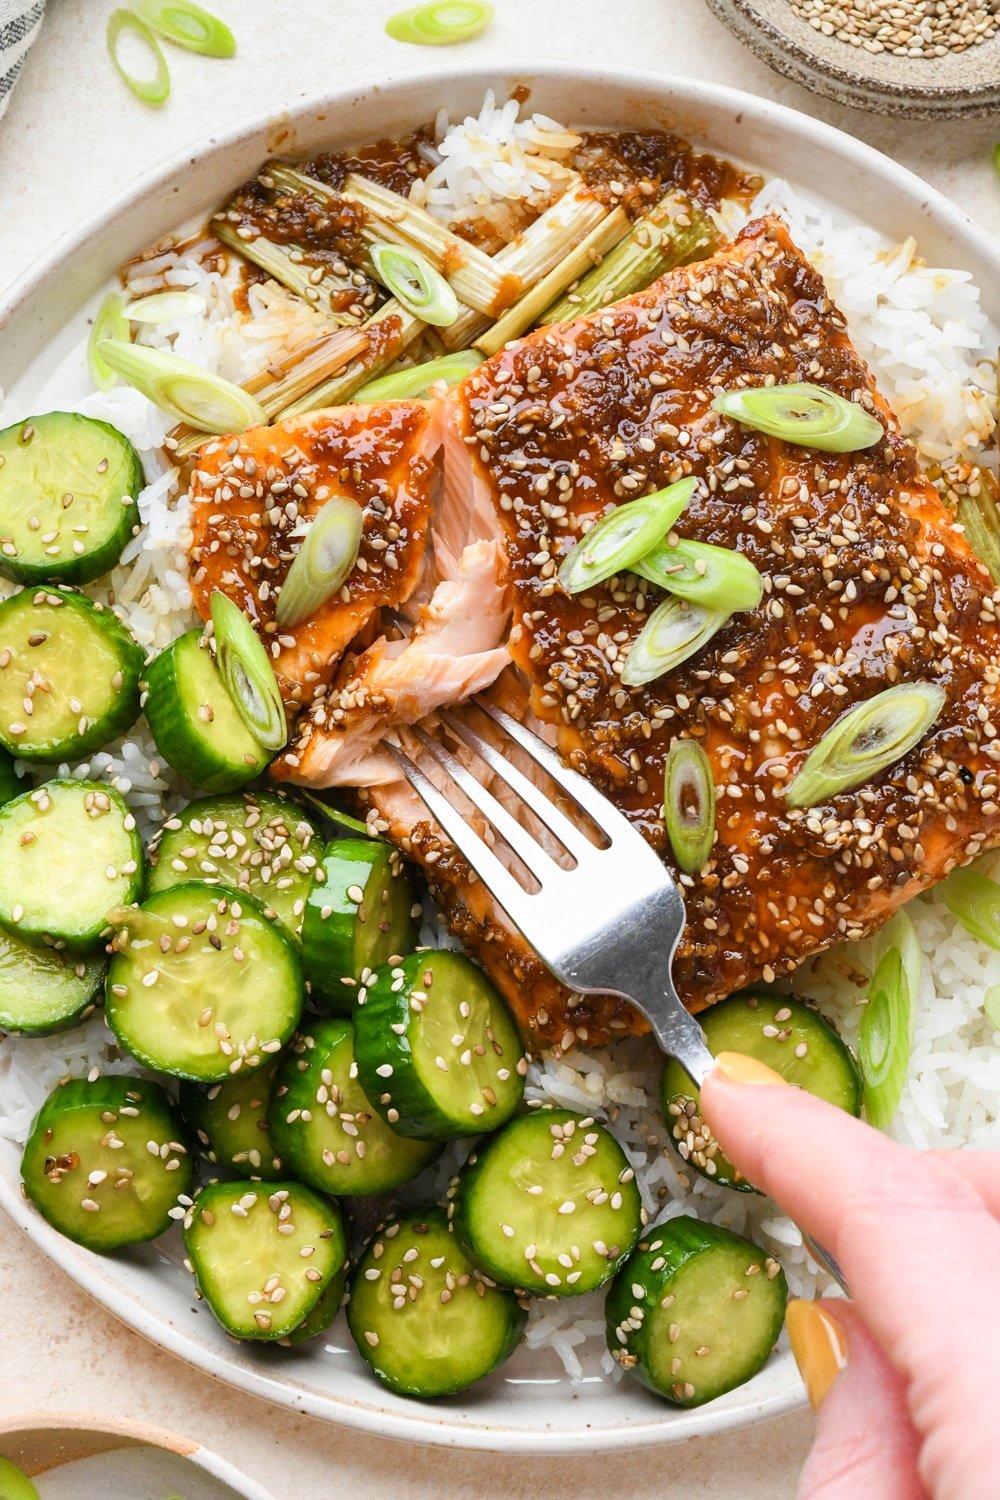 Caramelized garlic ginger salmon filet on white rice with a side of crunchy sesame cucumber salad, on a wide ceramic plate, with a fork digging into the salmon to show the tender interior.